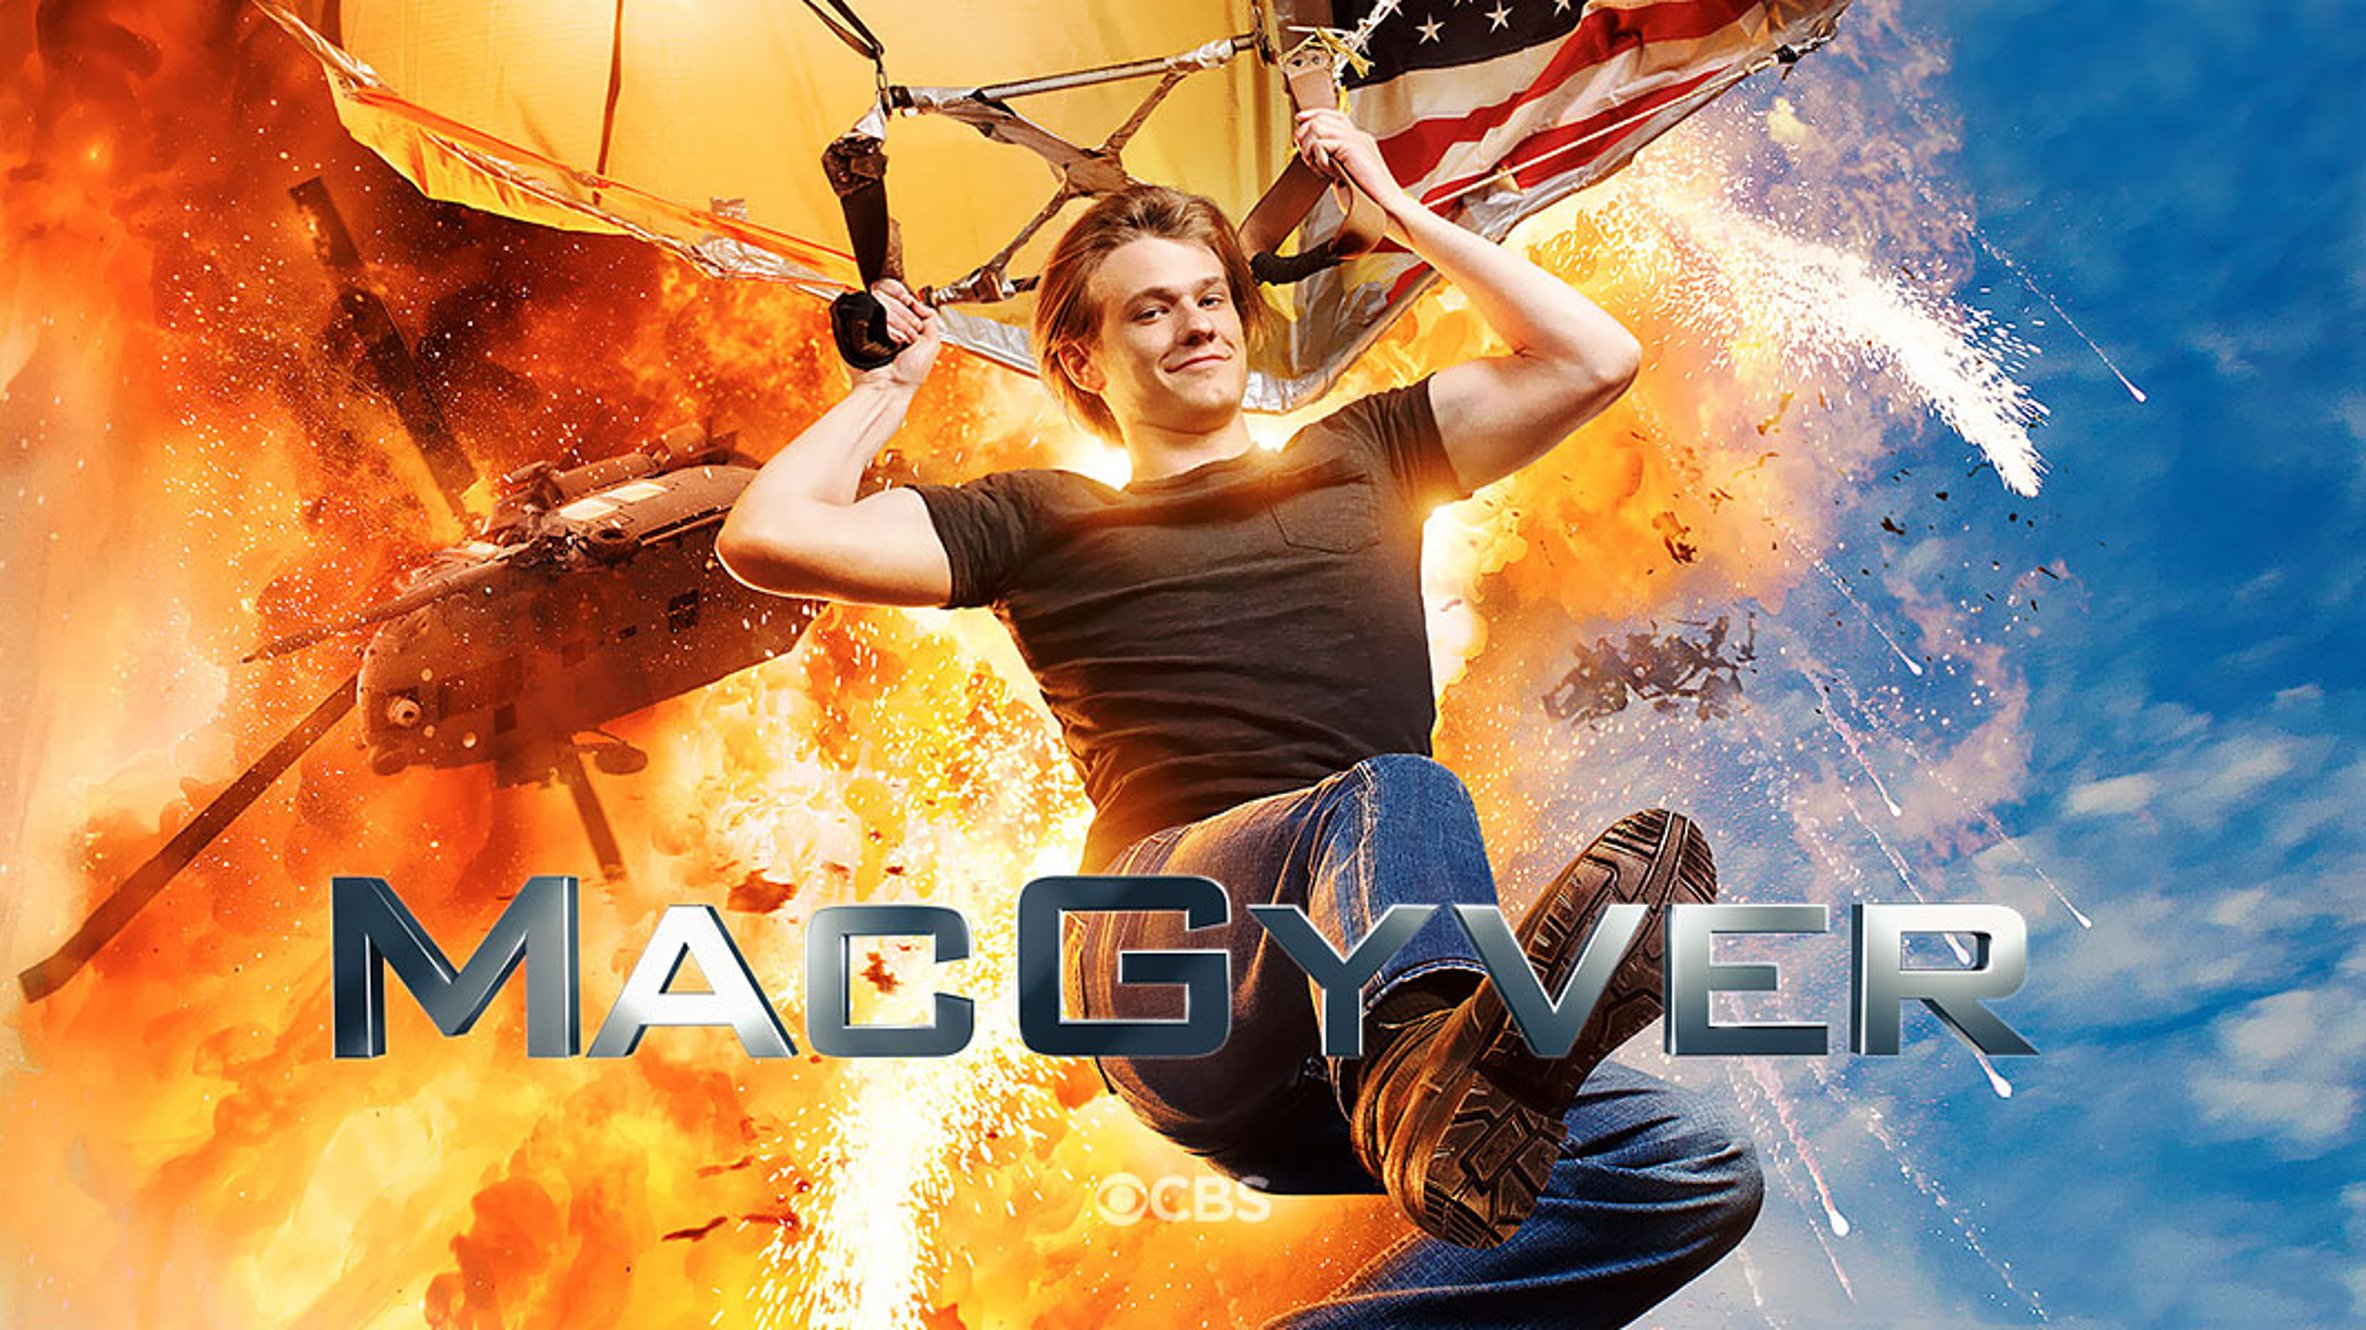 Casting Guards For The CBS TV series MacGyver!